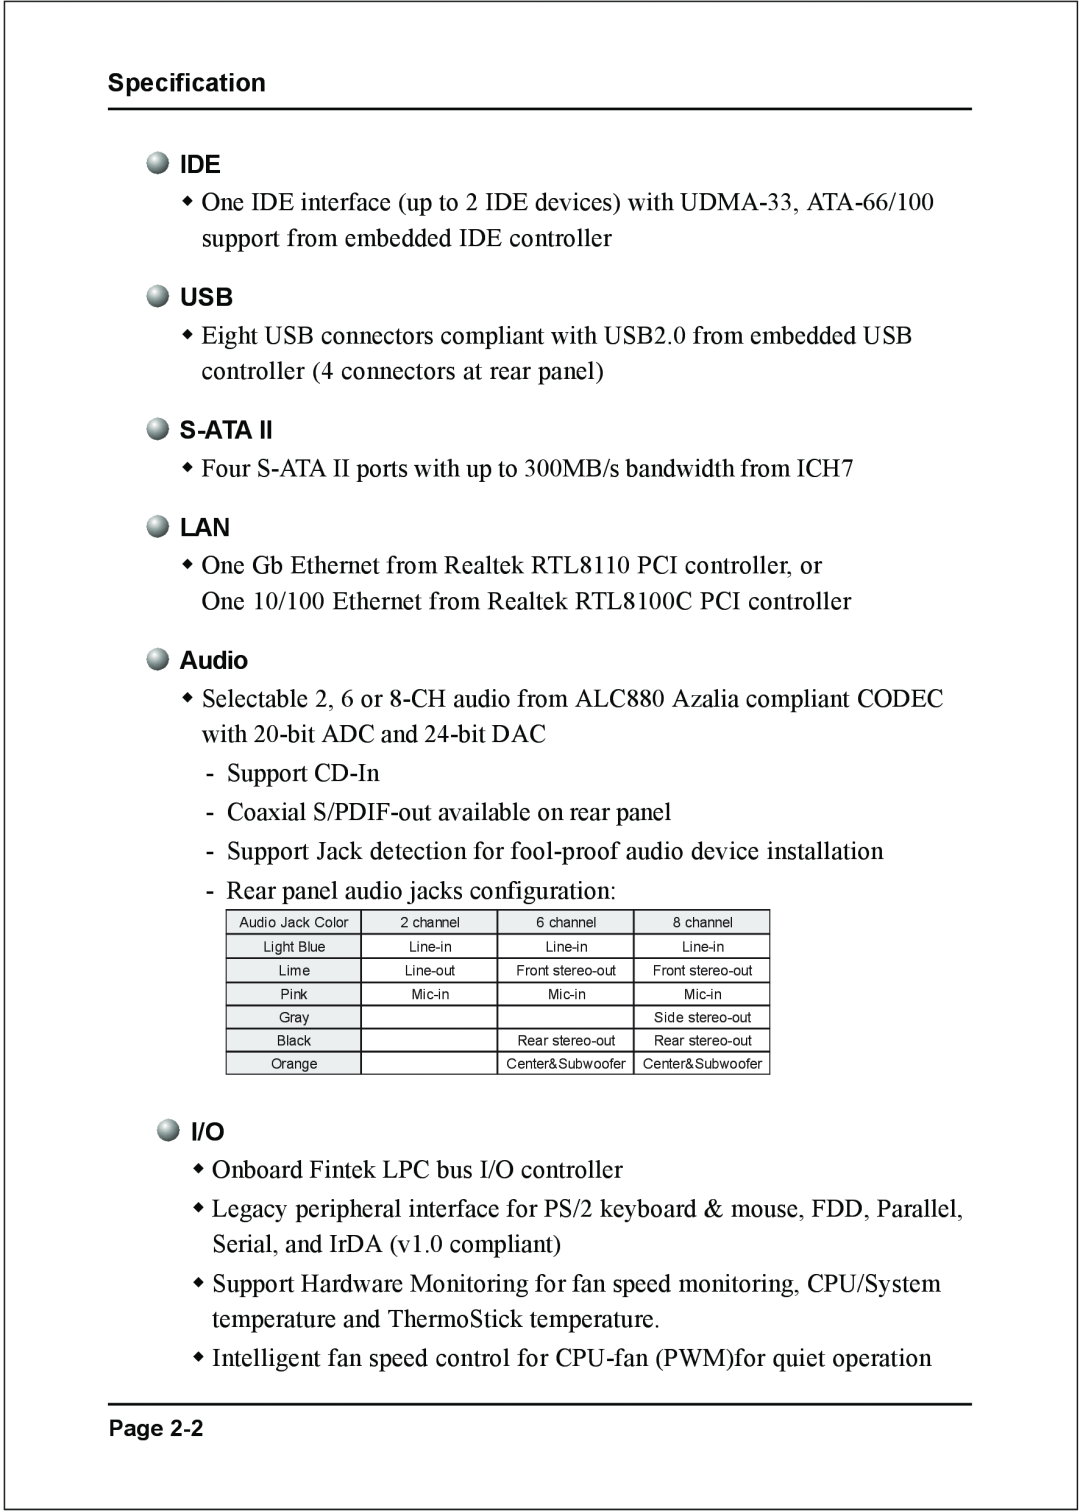 Intel I945P specifications S-Ata, Audio, Specification, Š Four S-ATA II ports with up to 300MB/s bandwidth from ICH7 